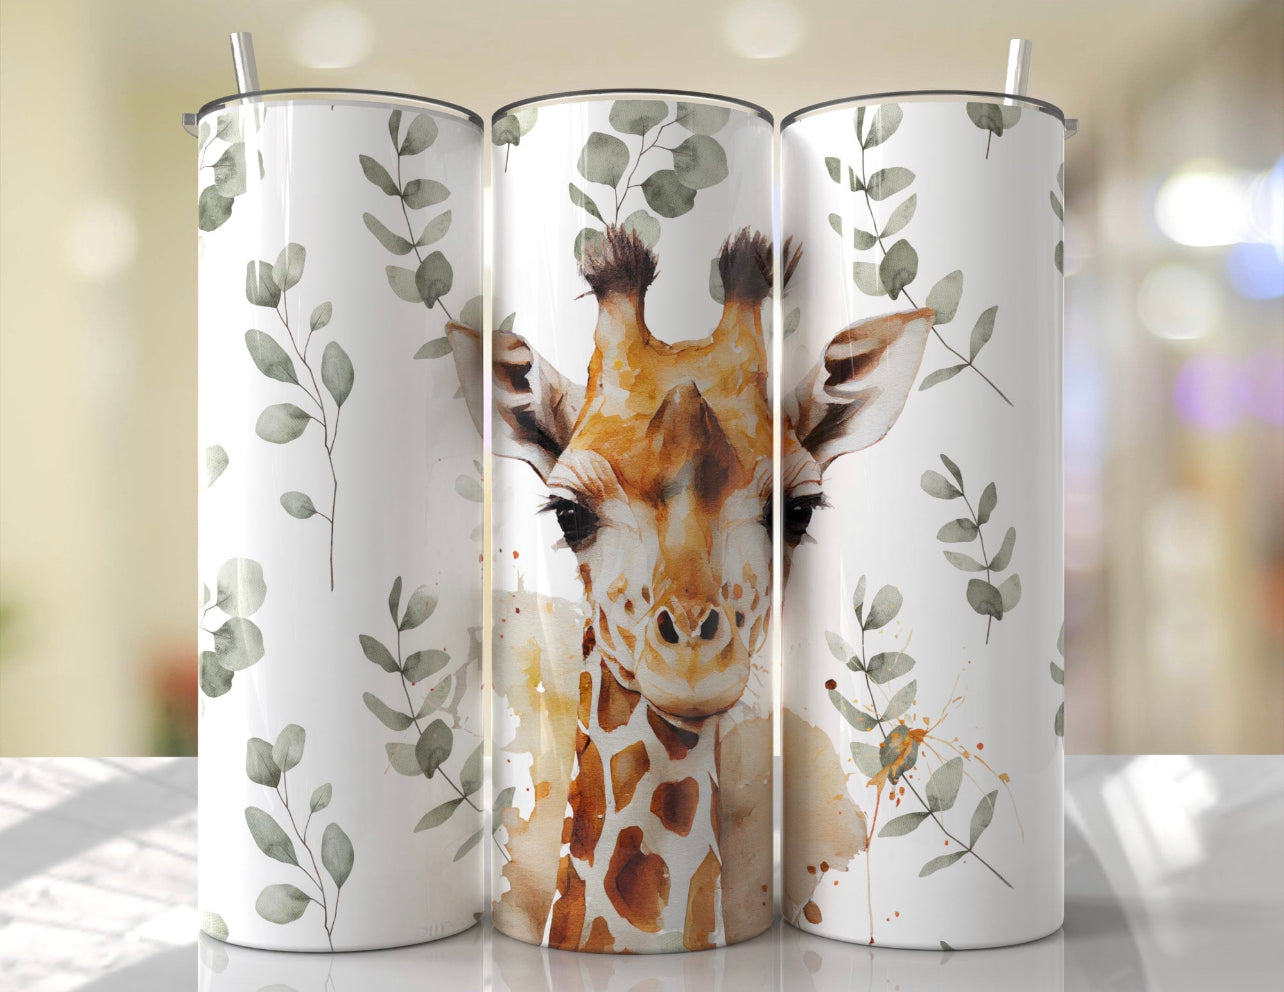 Moonlight Giraffe Tumbler – The Crafted Wings